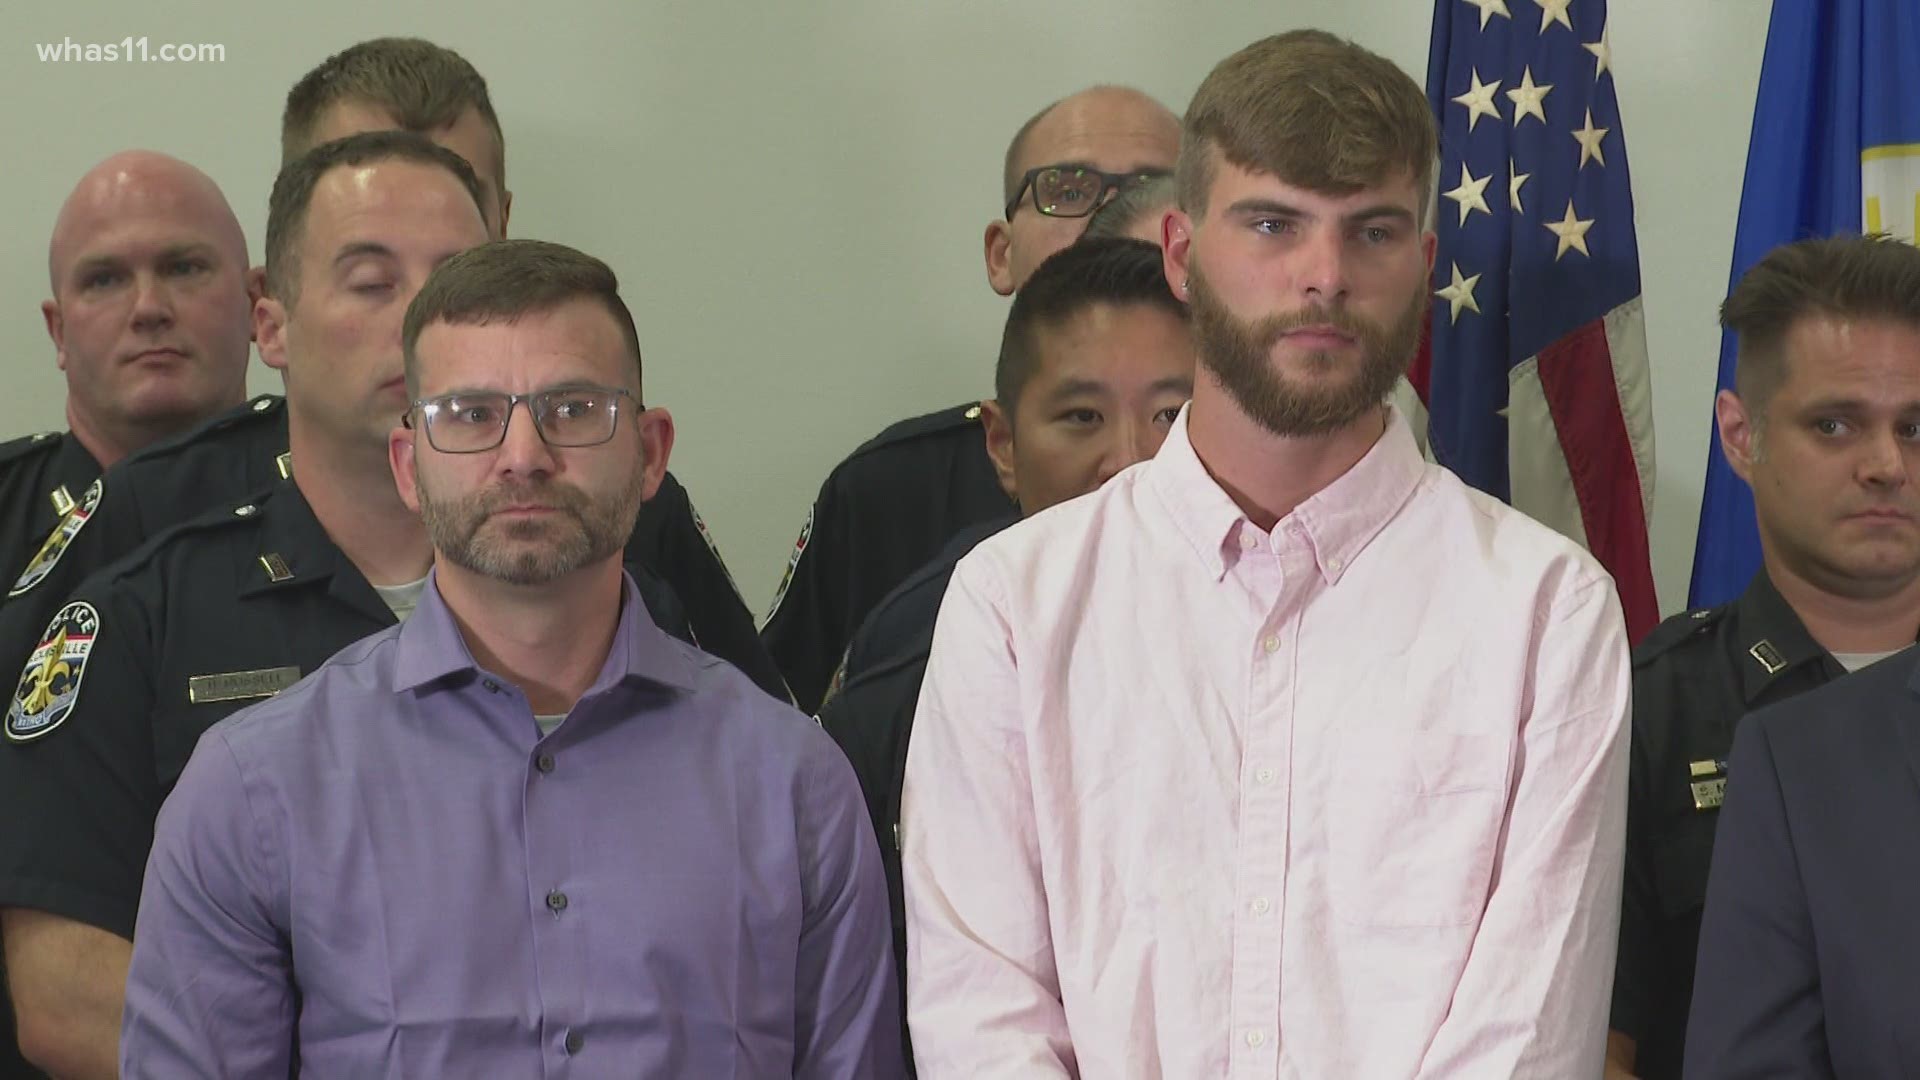 The LMPD officers and men responsible for helping save a child after a suspected kidnapping were recognized by Sen. Rand Paul.